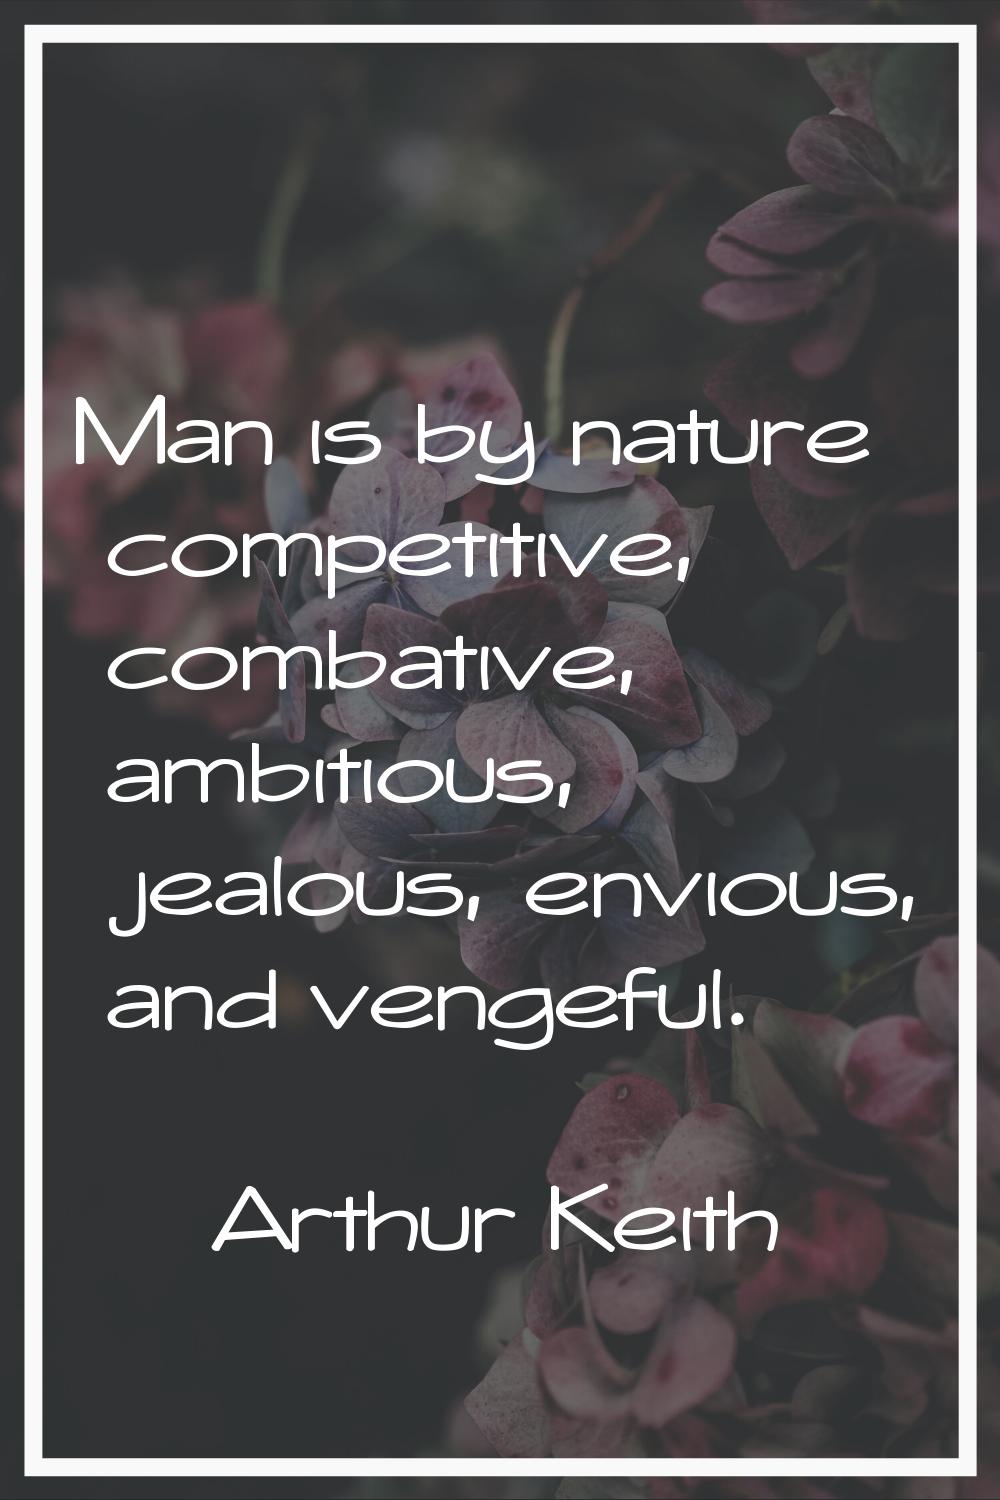 Man is by nature competitive, combative, ambitious, jealous, envious, and vengeful.